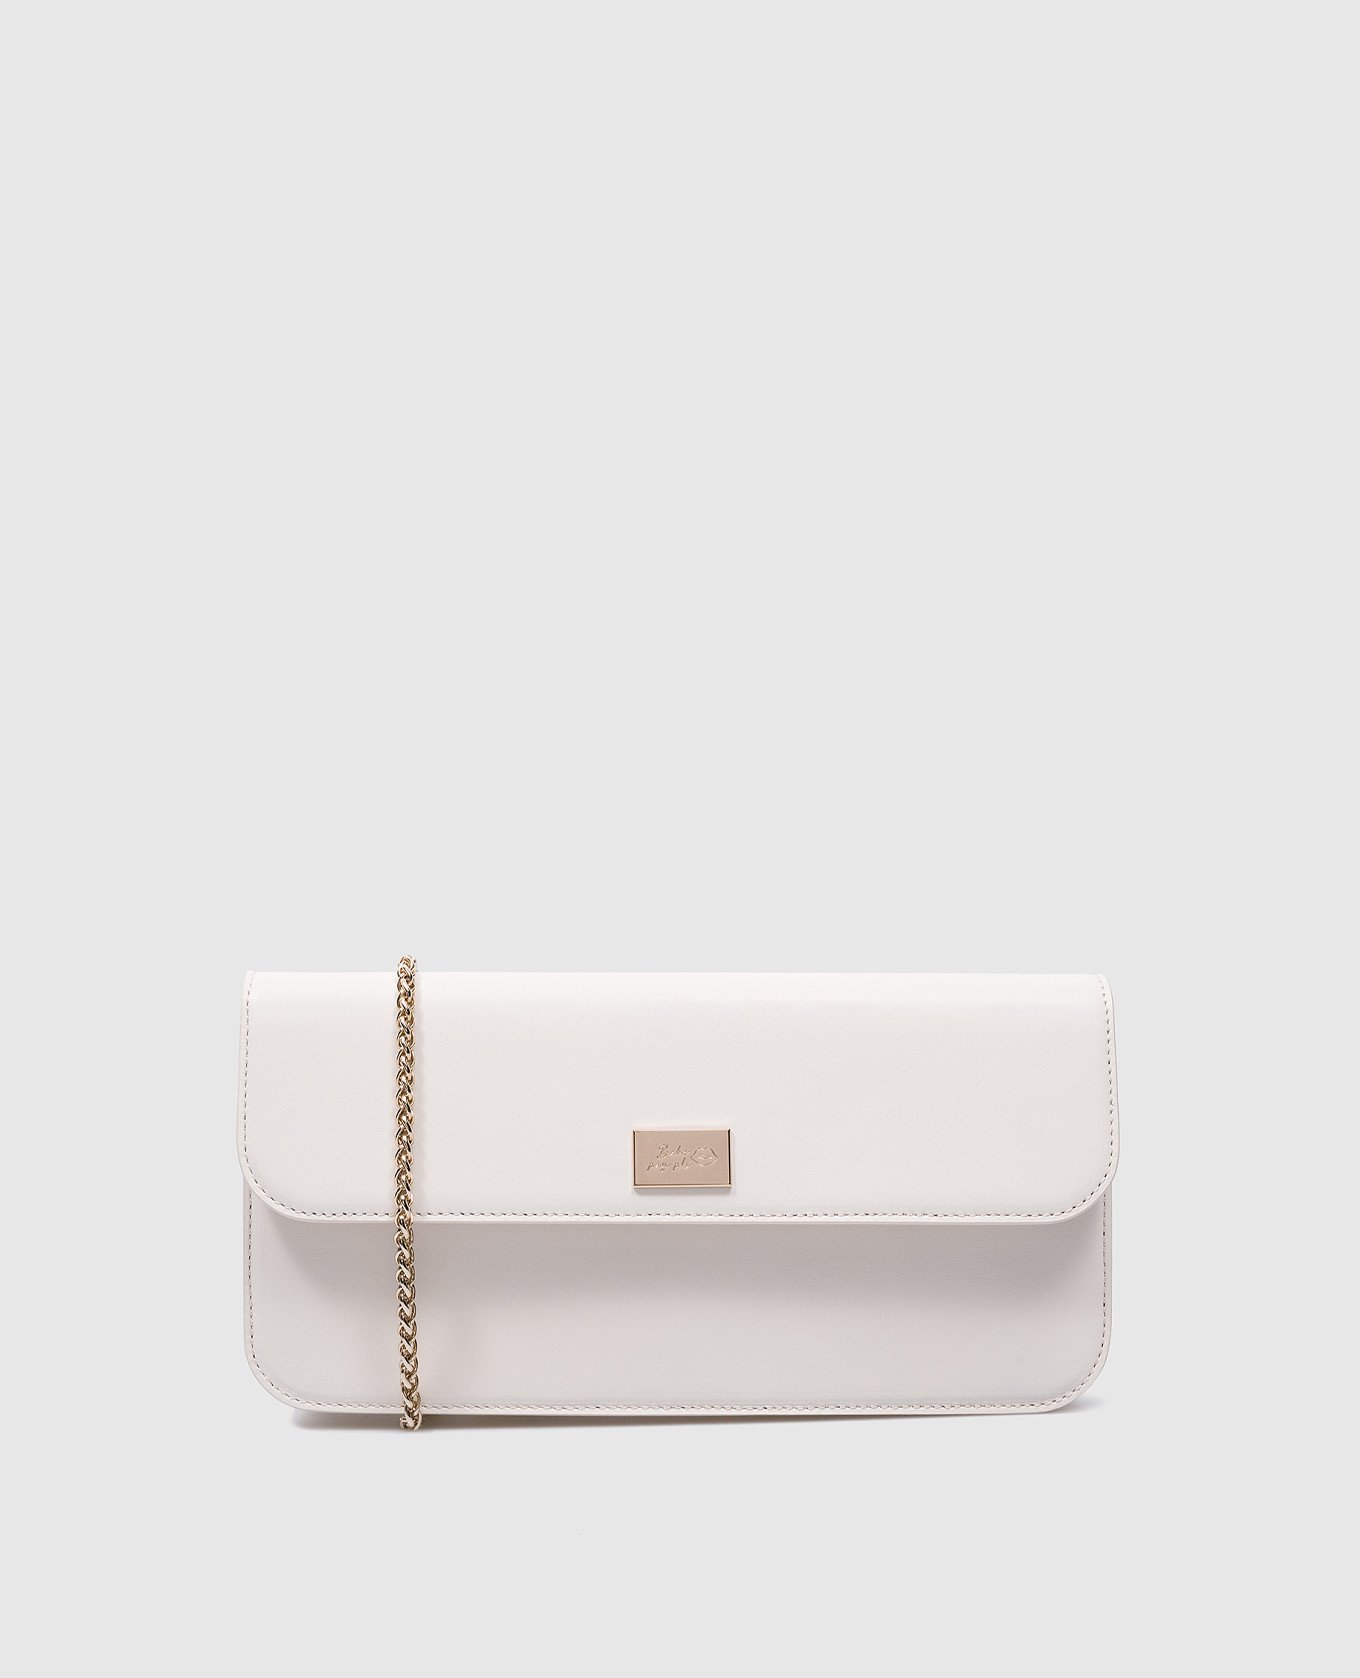 White leather baguette bag with metal logo